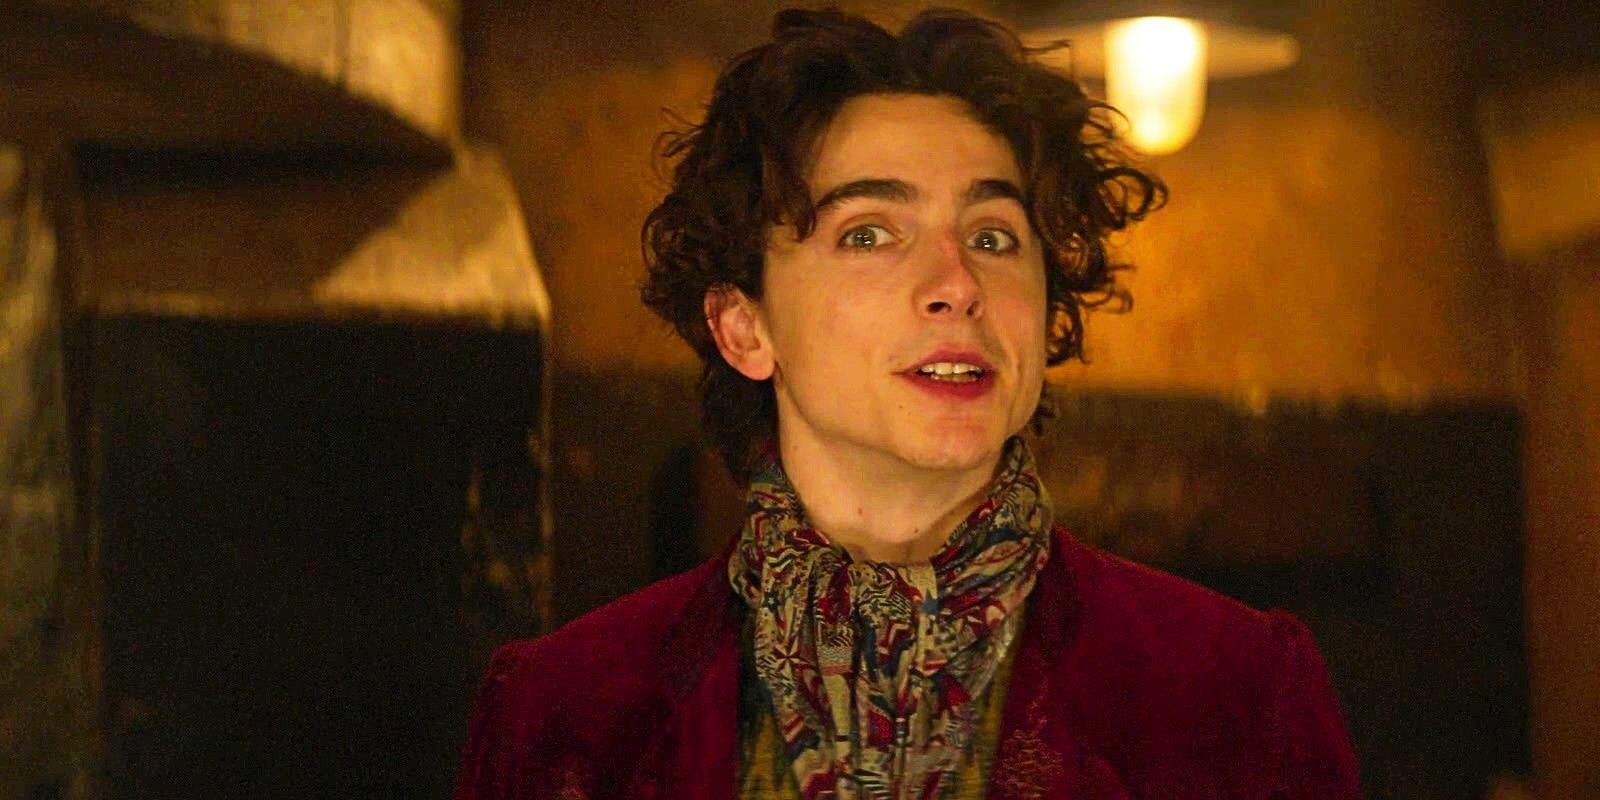 Timothee Chalamet with a slightly crazed expression as Willy Wonka in Wonka